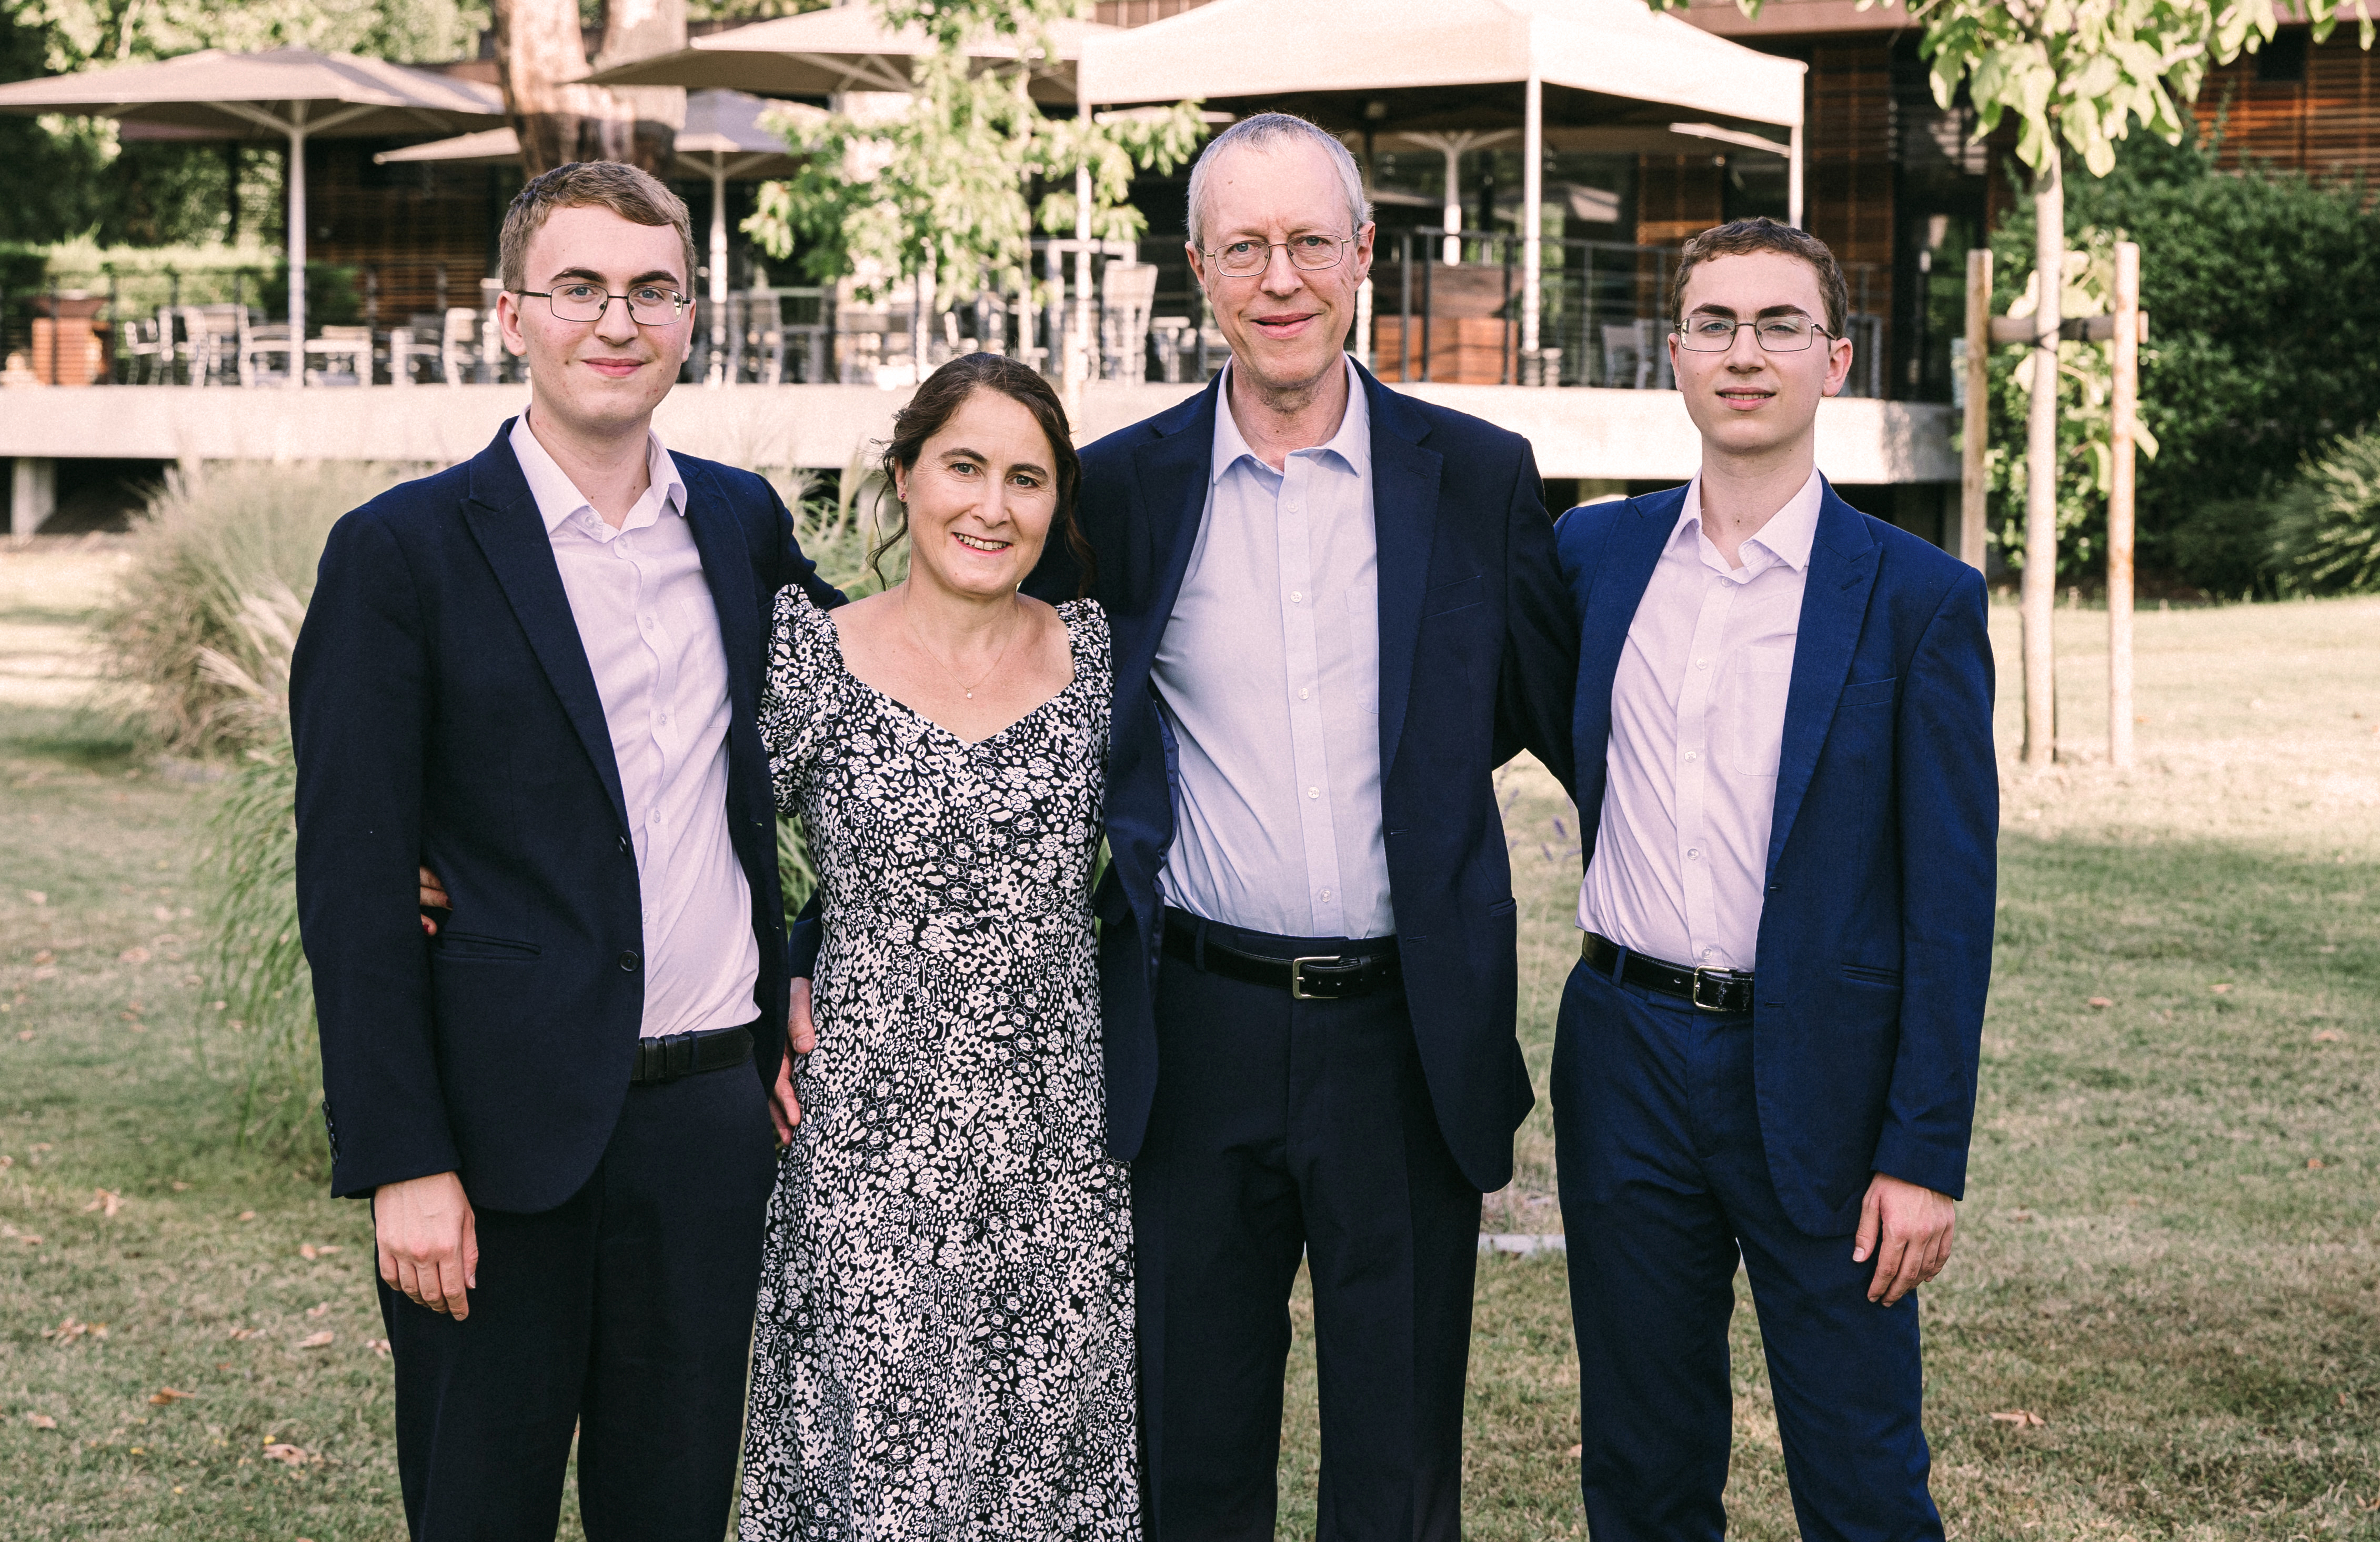 Nick Higham spends quality time with his wife and sons at a family wedding in 2023. From left to right: Thomas Higham, Françoise Tisseur, Nick Higham, and Freddie Higham. Photo courtesy of Jérémie Laye Photography.